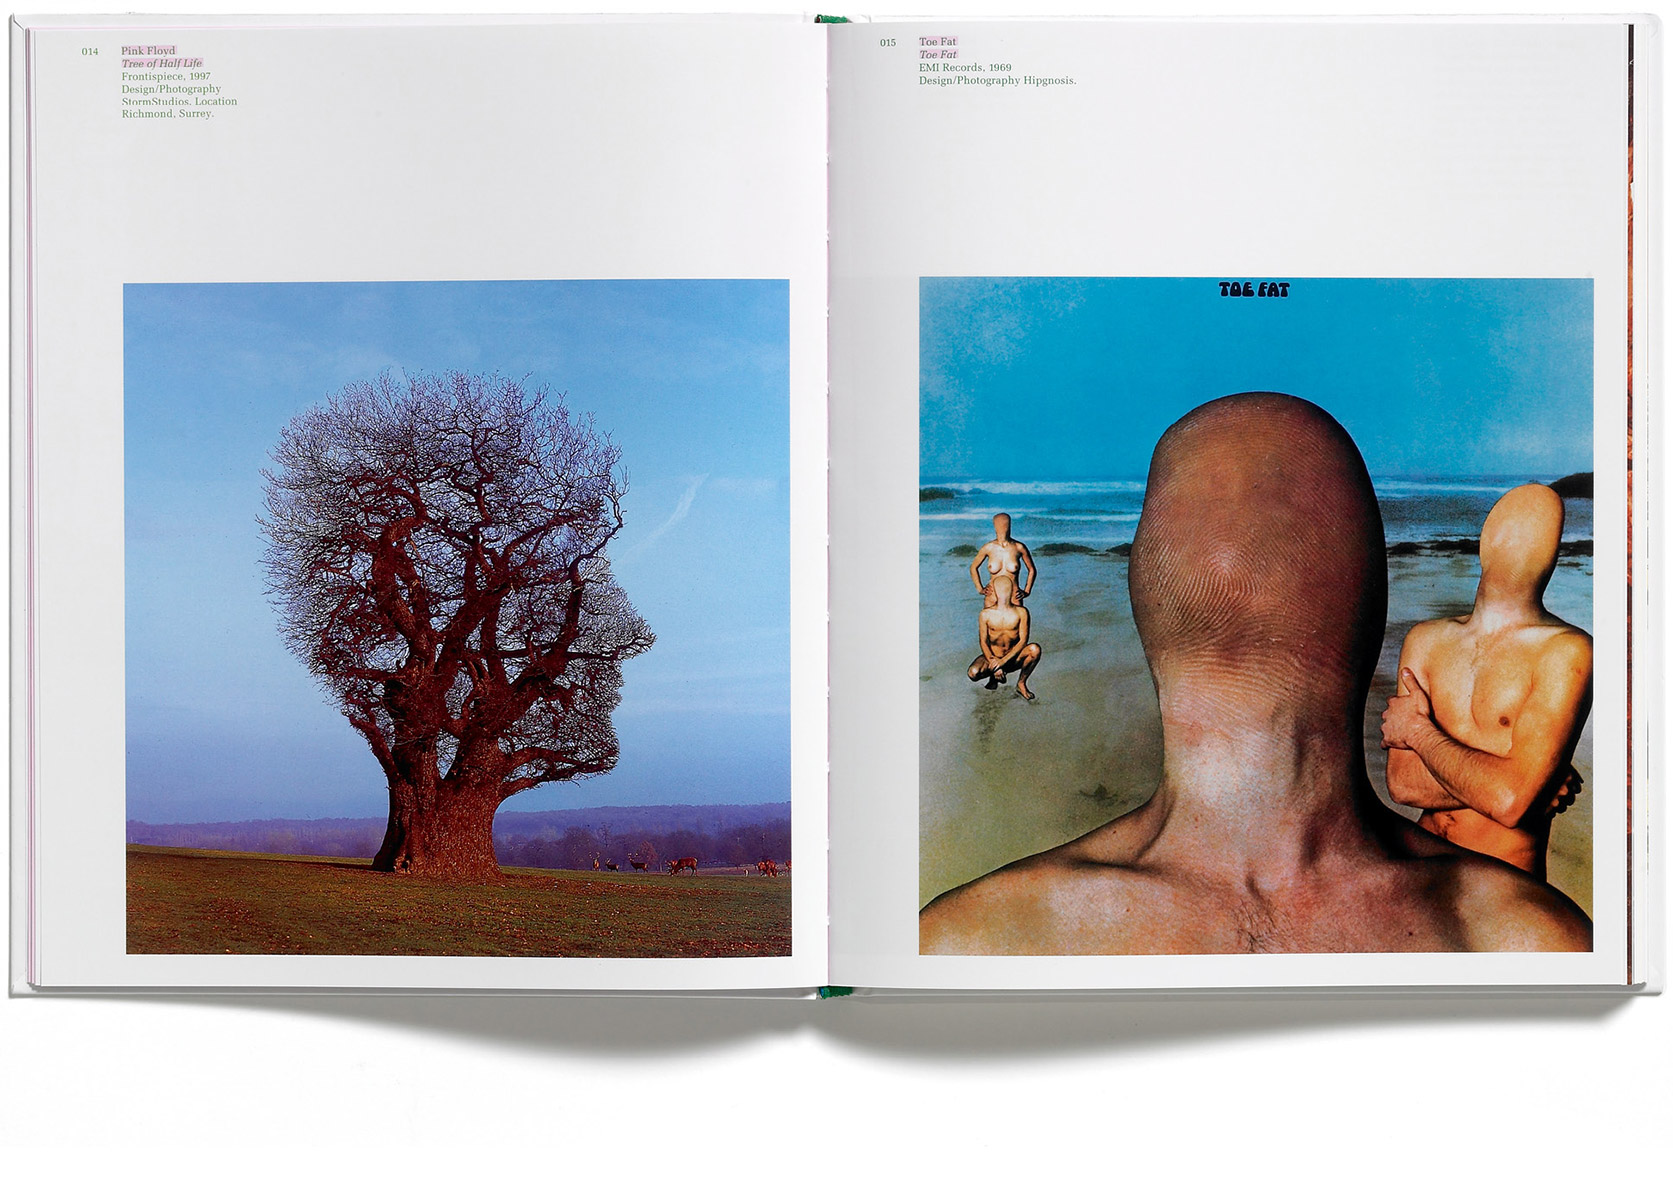 Browns Editions, Browns Editions Publishing, Browns Editions Books, Browns Editions Storm Thorgerson, Browns Editions HSP Lecture Series 5, Browns Editions Storm Thorgerson HSP Lecture Series 5